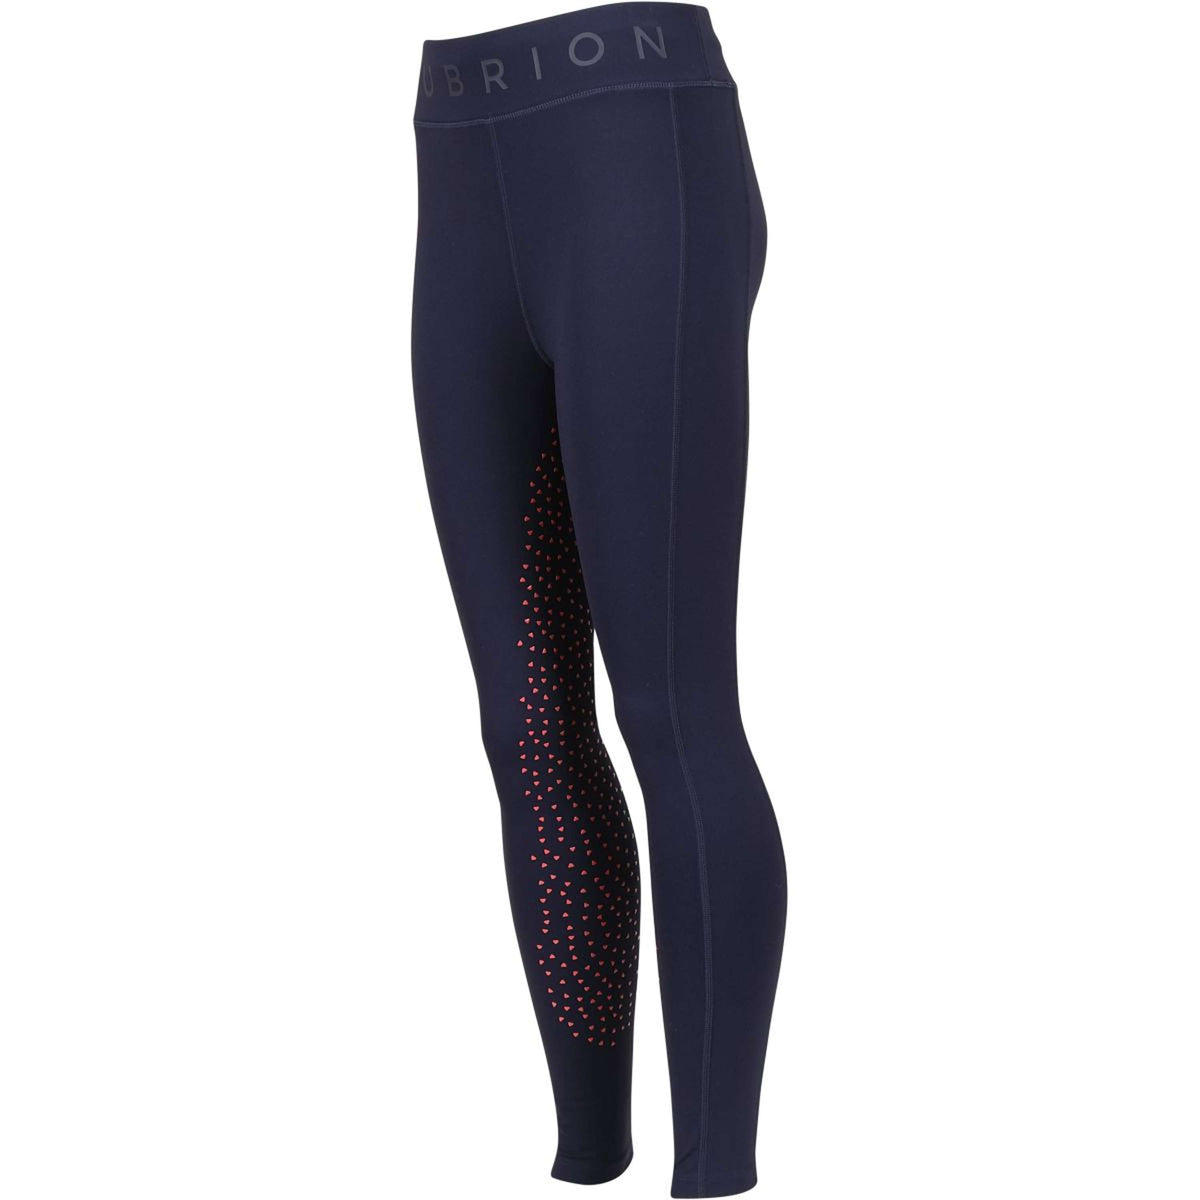 Aubrion by Shires Reitleggings Non Stop Young Rider Navy